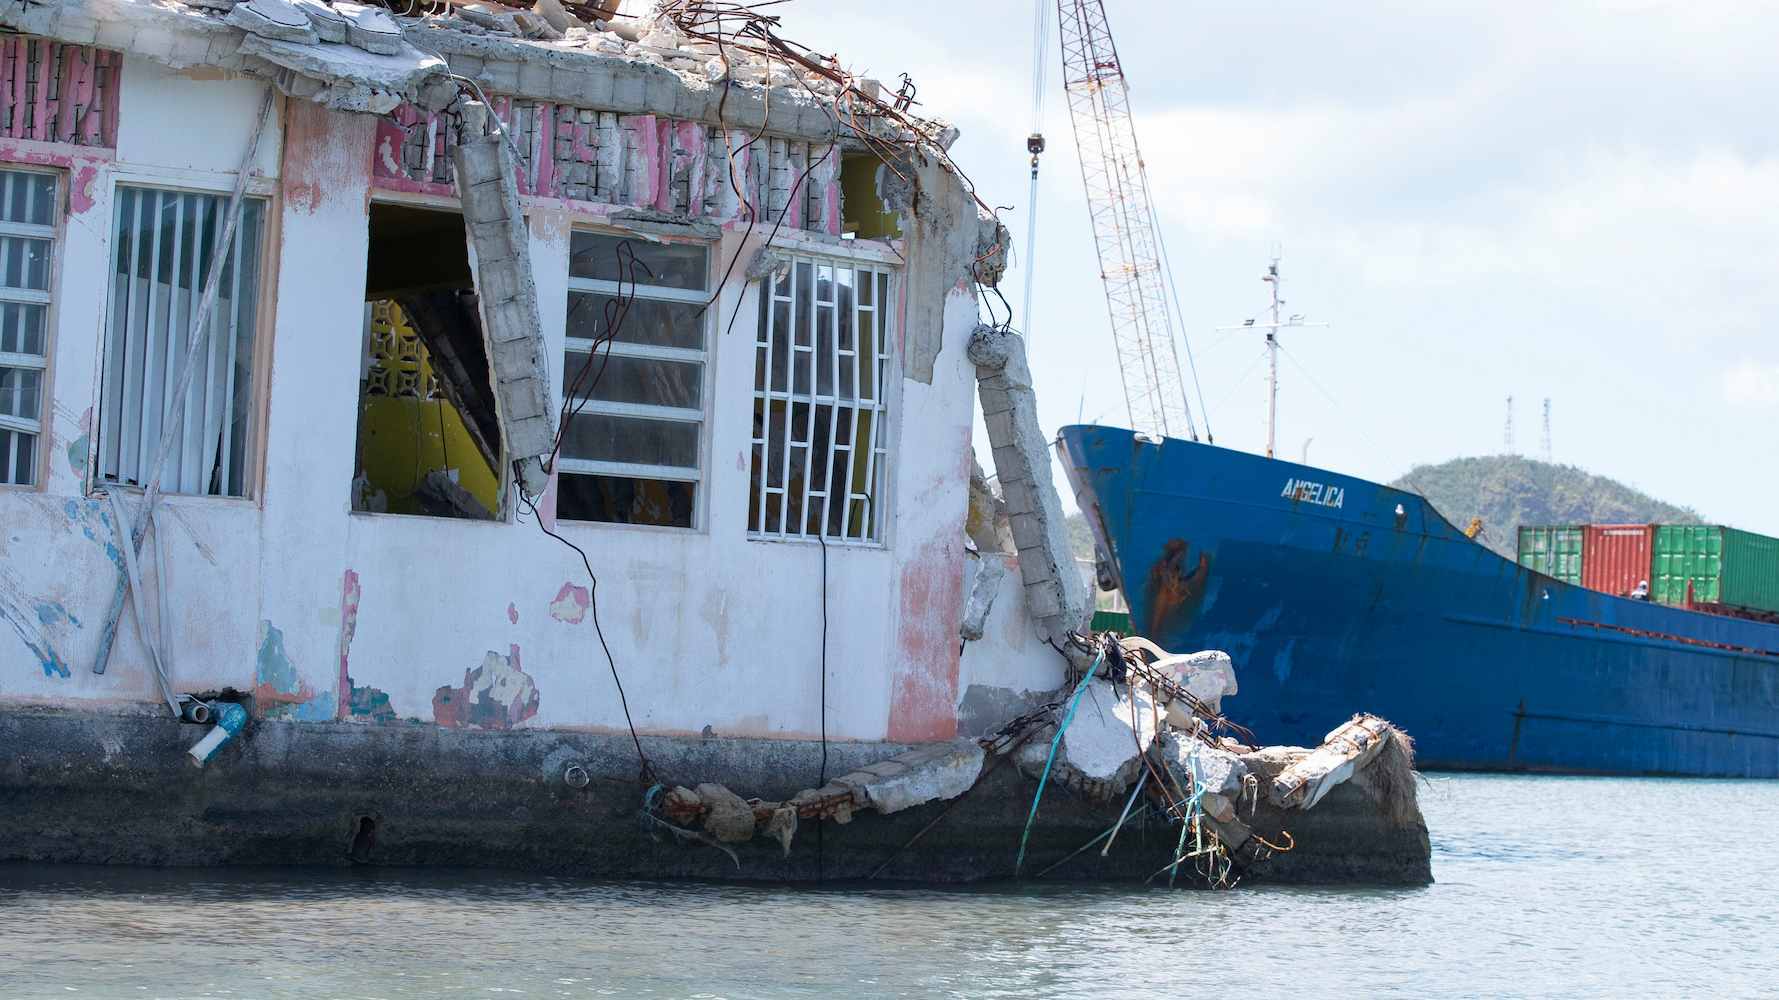 There was considerable damage on infrastructure due to the hurricanes that battered Colombia’s Archipelago of San Andrés, Providencia and Santa Catalina in 2020. Photo: Irene Lema/CEMarin.